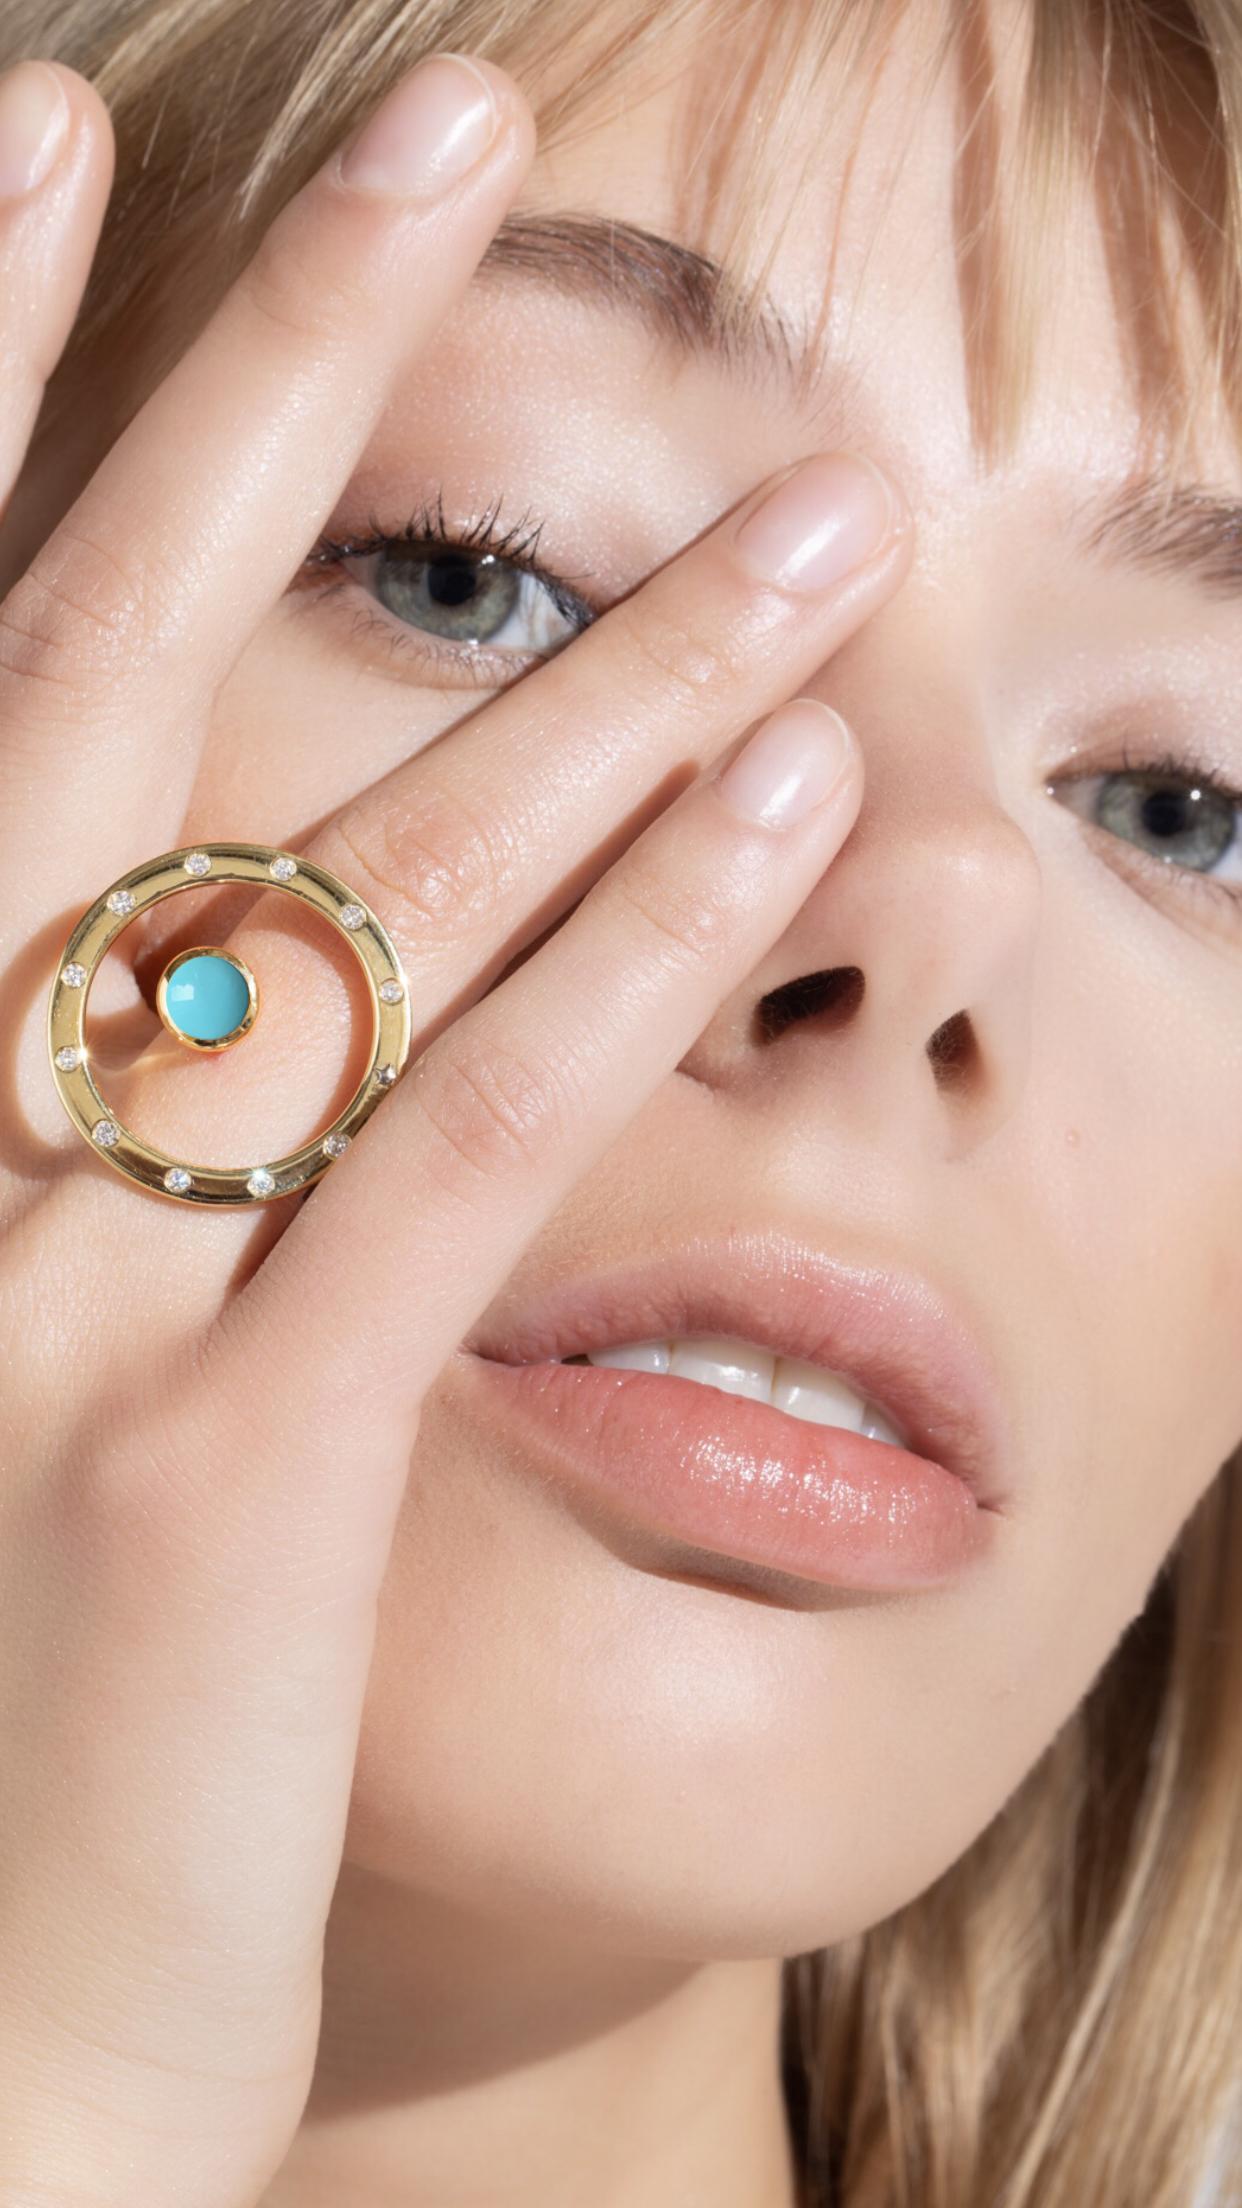 ORA Collection. 
Inspired by the concept of time, Anna Maccieri Rossi's 'ORA Ring' features a circular silhouette with turquoise cabochon at center. The hours of the day are marked by the 11 white diamonds and star at 8 o'clock around the